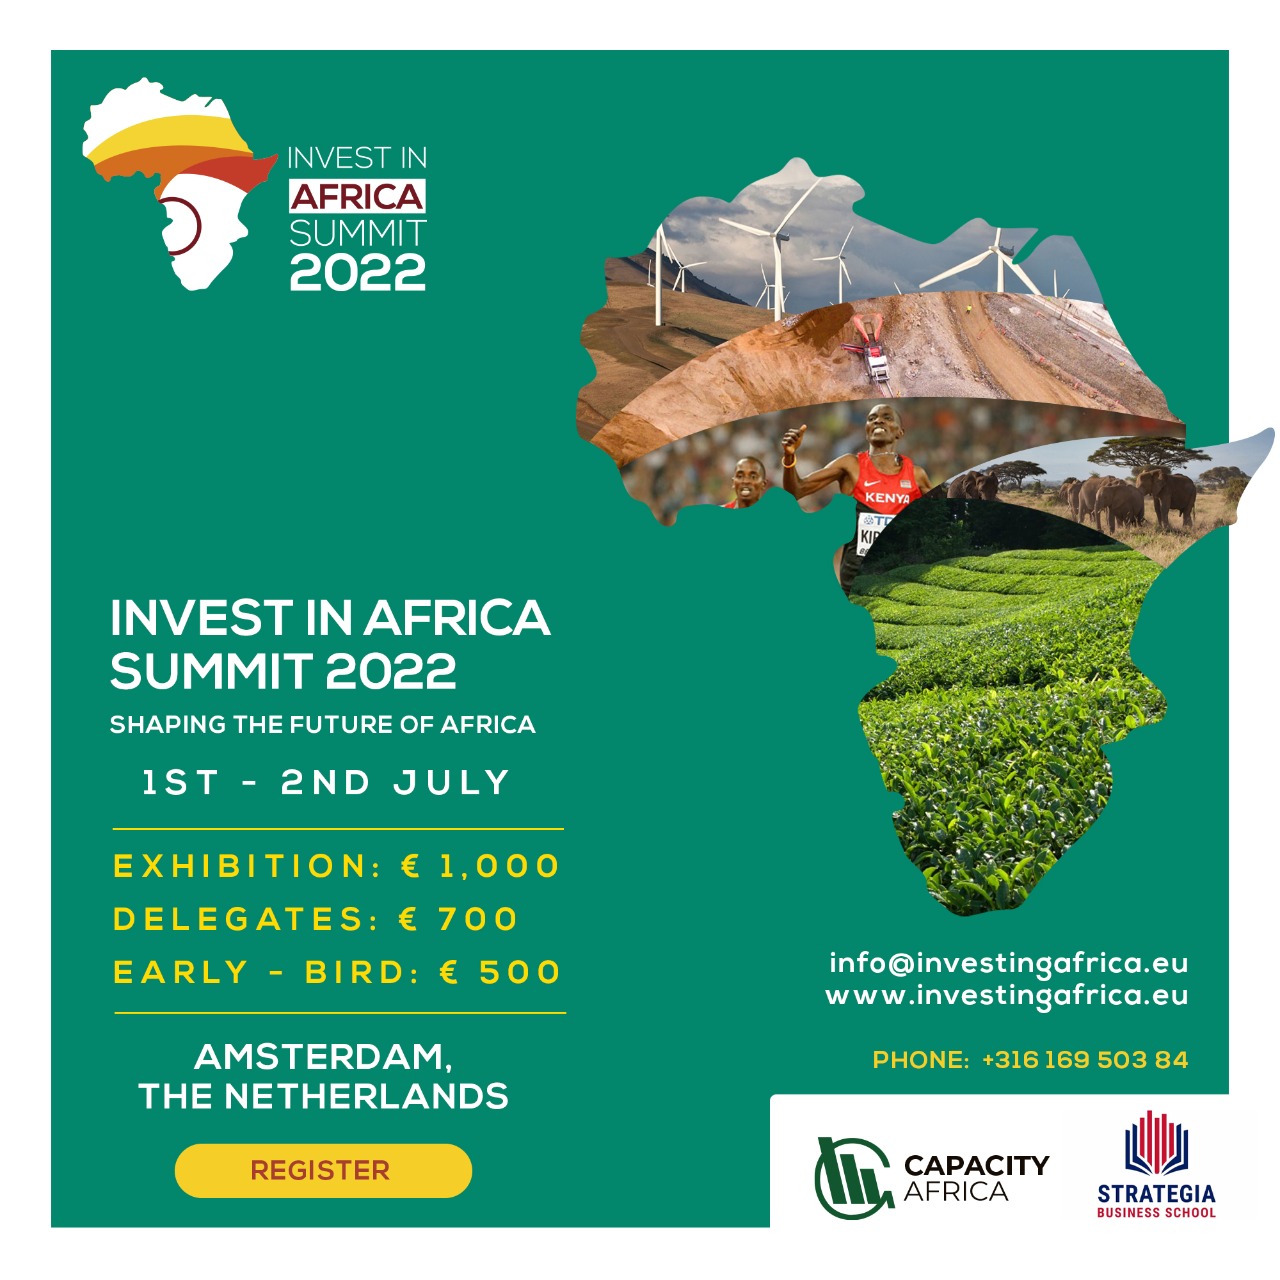 INVEST IN AFRICA SUMMIT 2022 organized by Strategia Business school